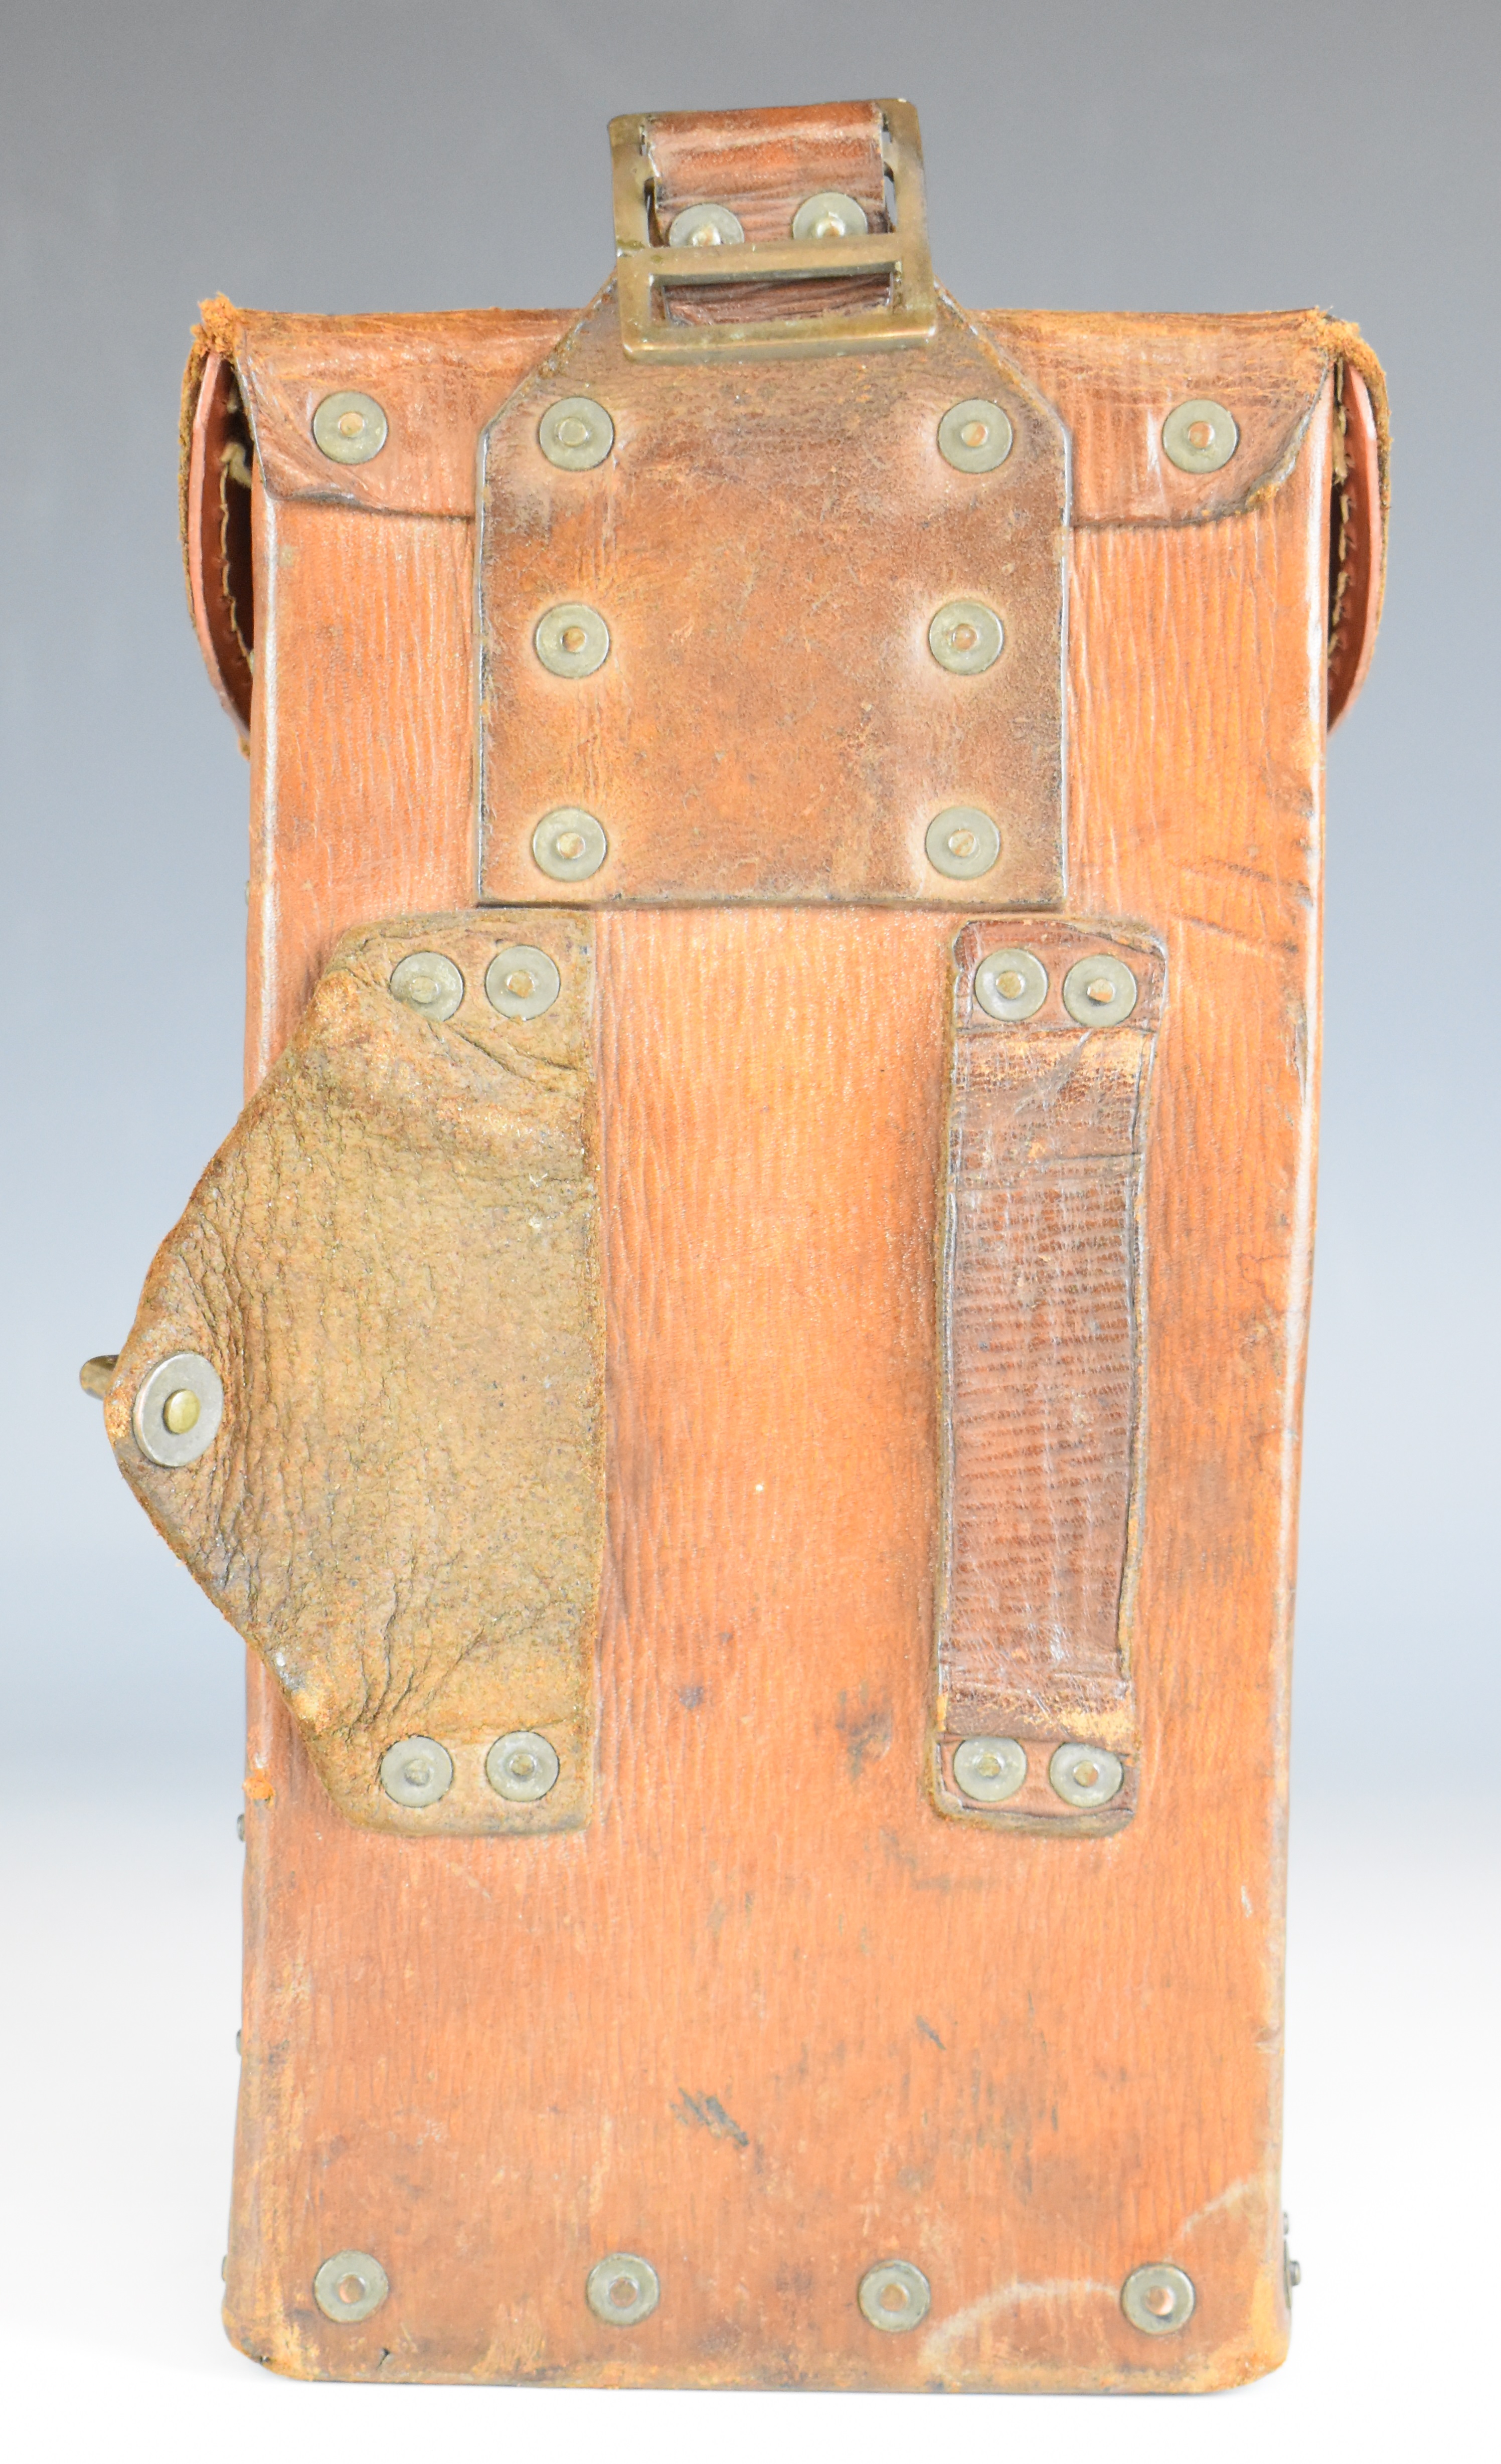 WW2 British army leather magazine pouch or holster with brass fittings, 24 x 12 x 7.5cm. - Image 3 of 6